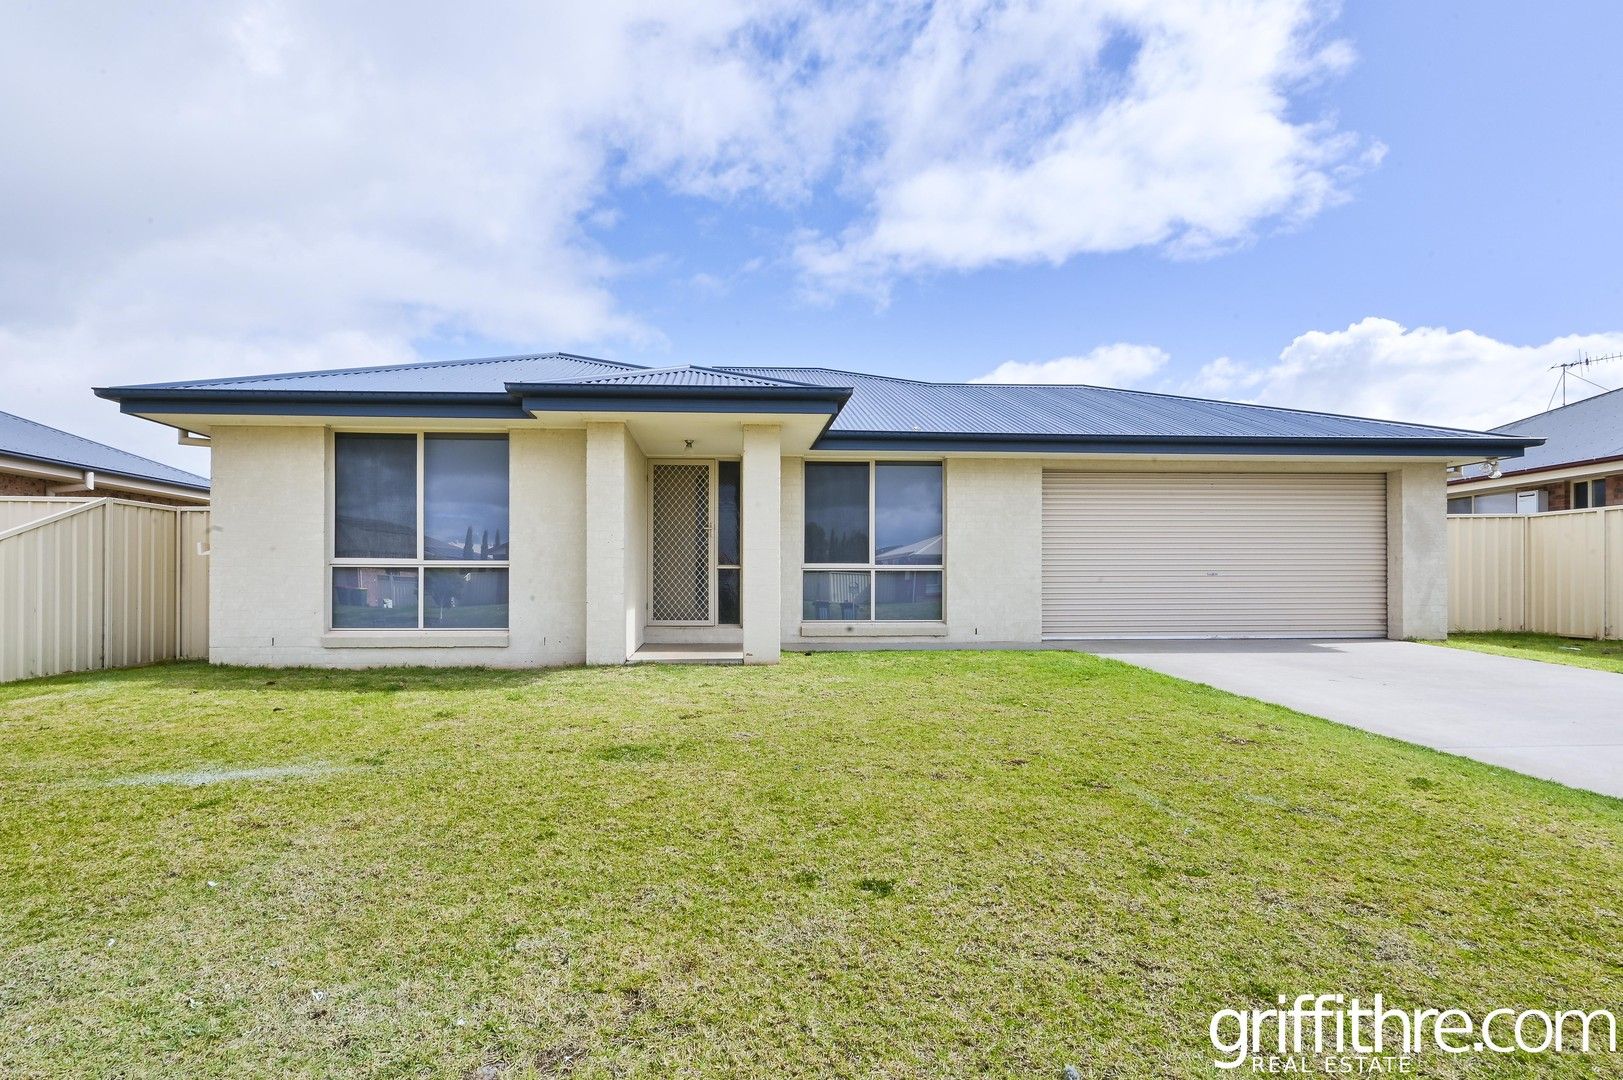 4 bedrooms House in 25 Tucker Street GRIFFITH NSW, 2680